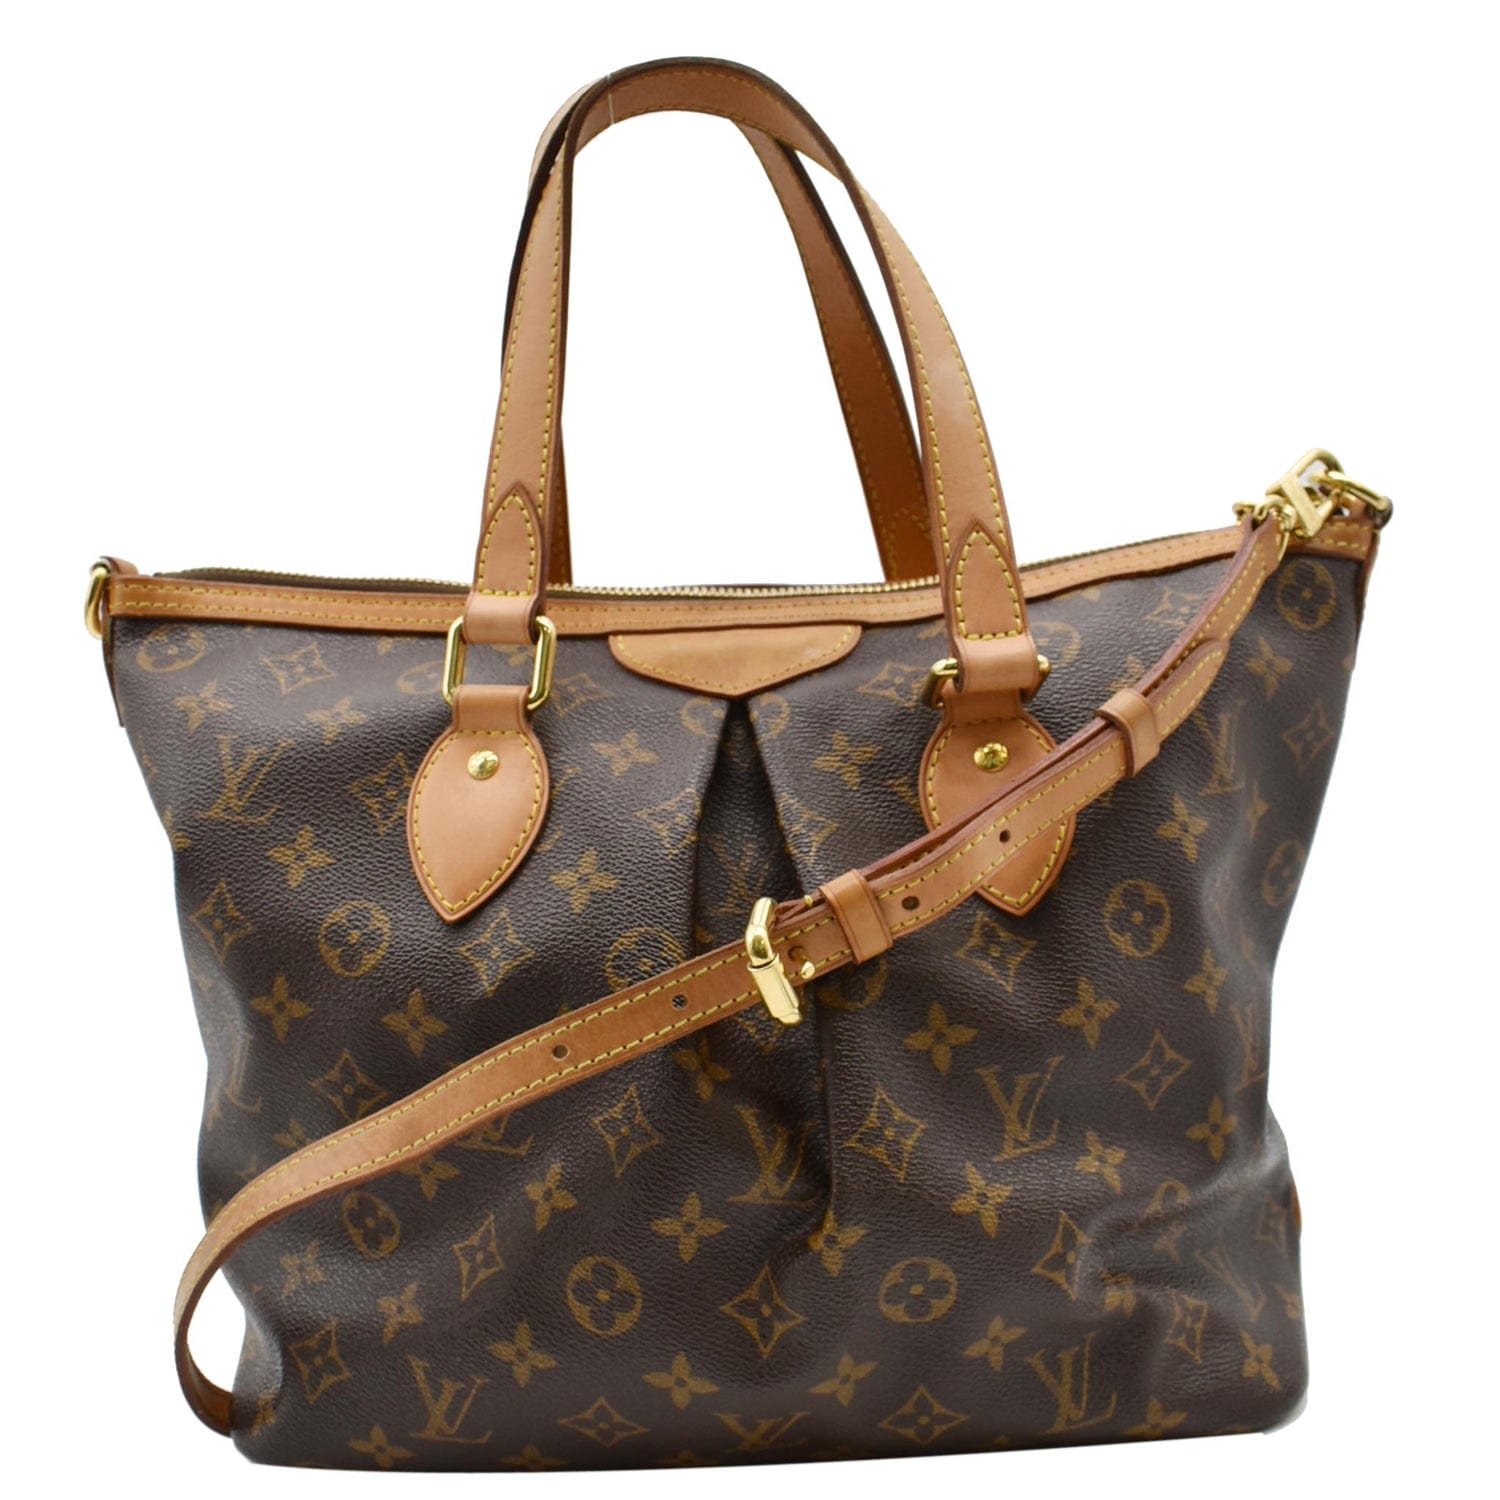 Pre-owned Authentic Louis Vuitton Palermo Tote Bag. Excellent condition